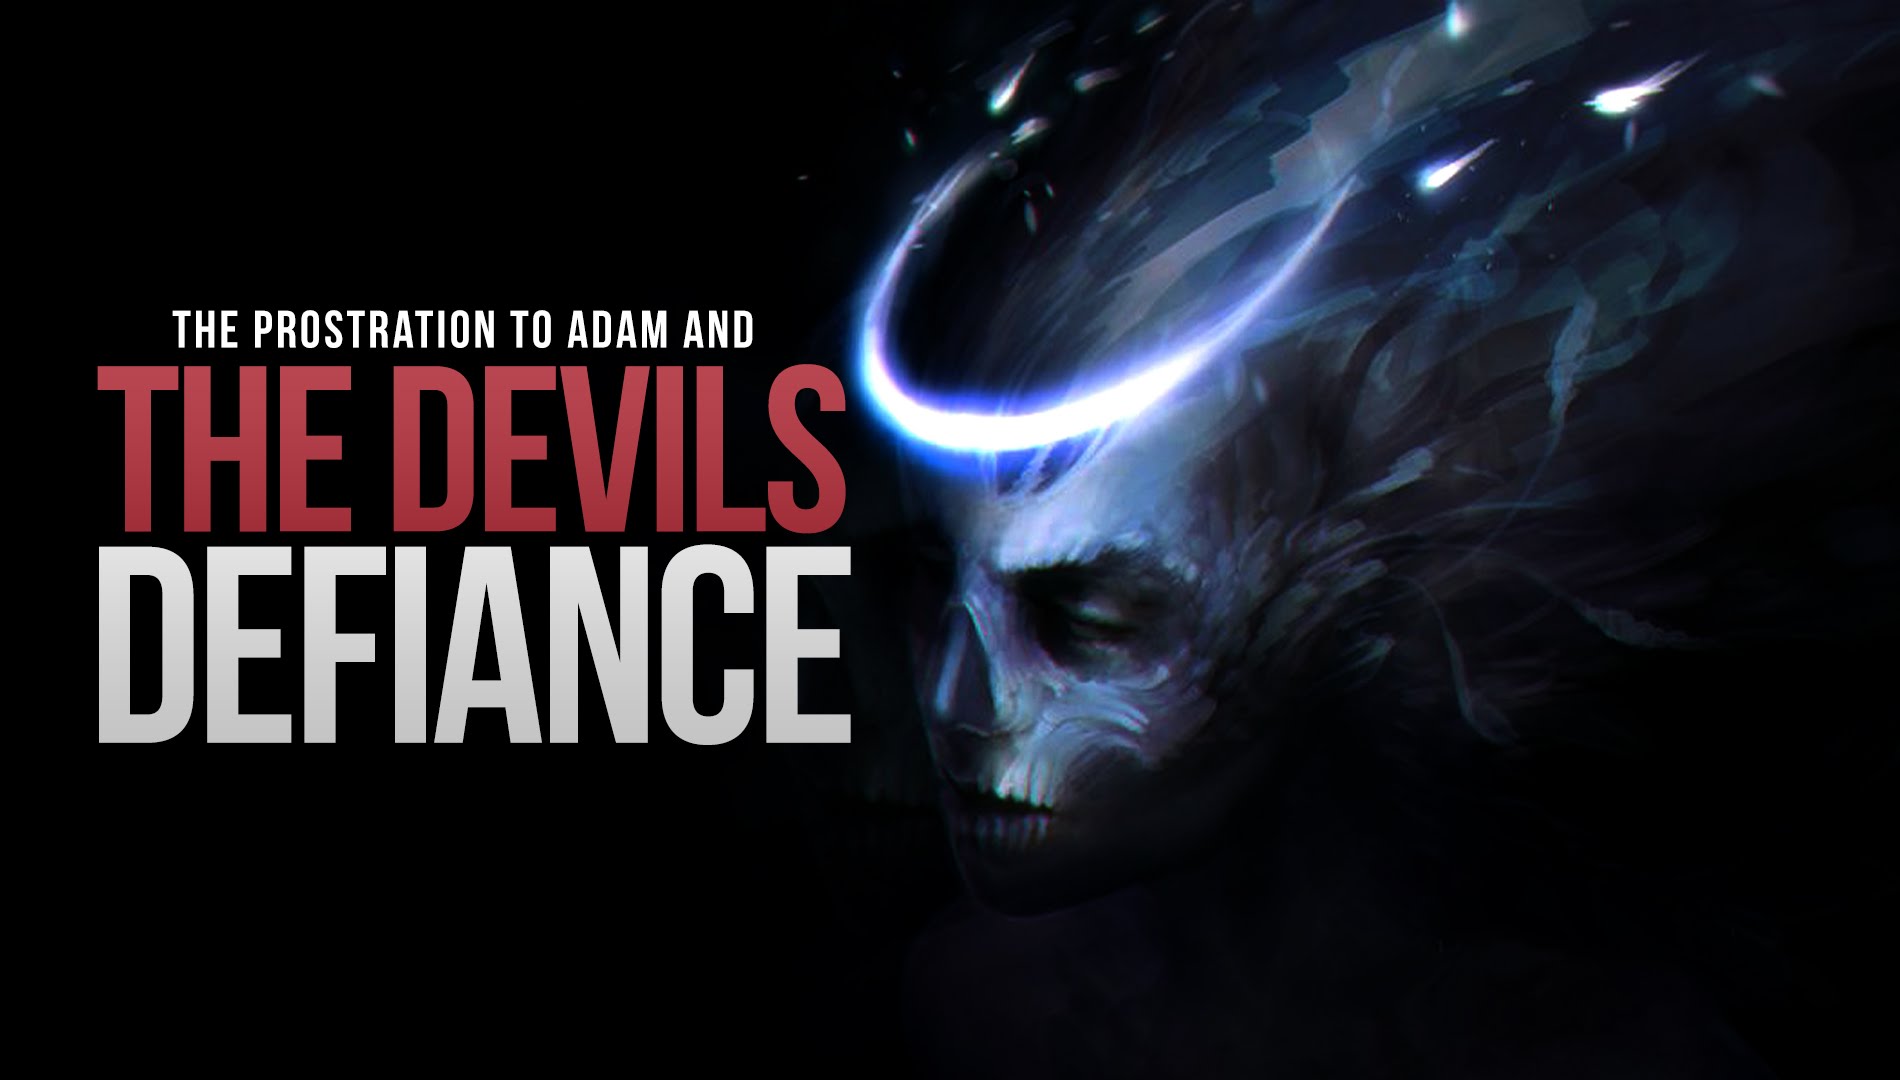 THE DEVILS DEFIANCE